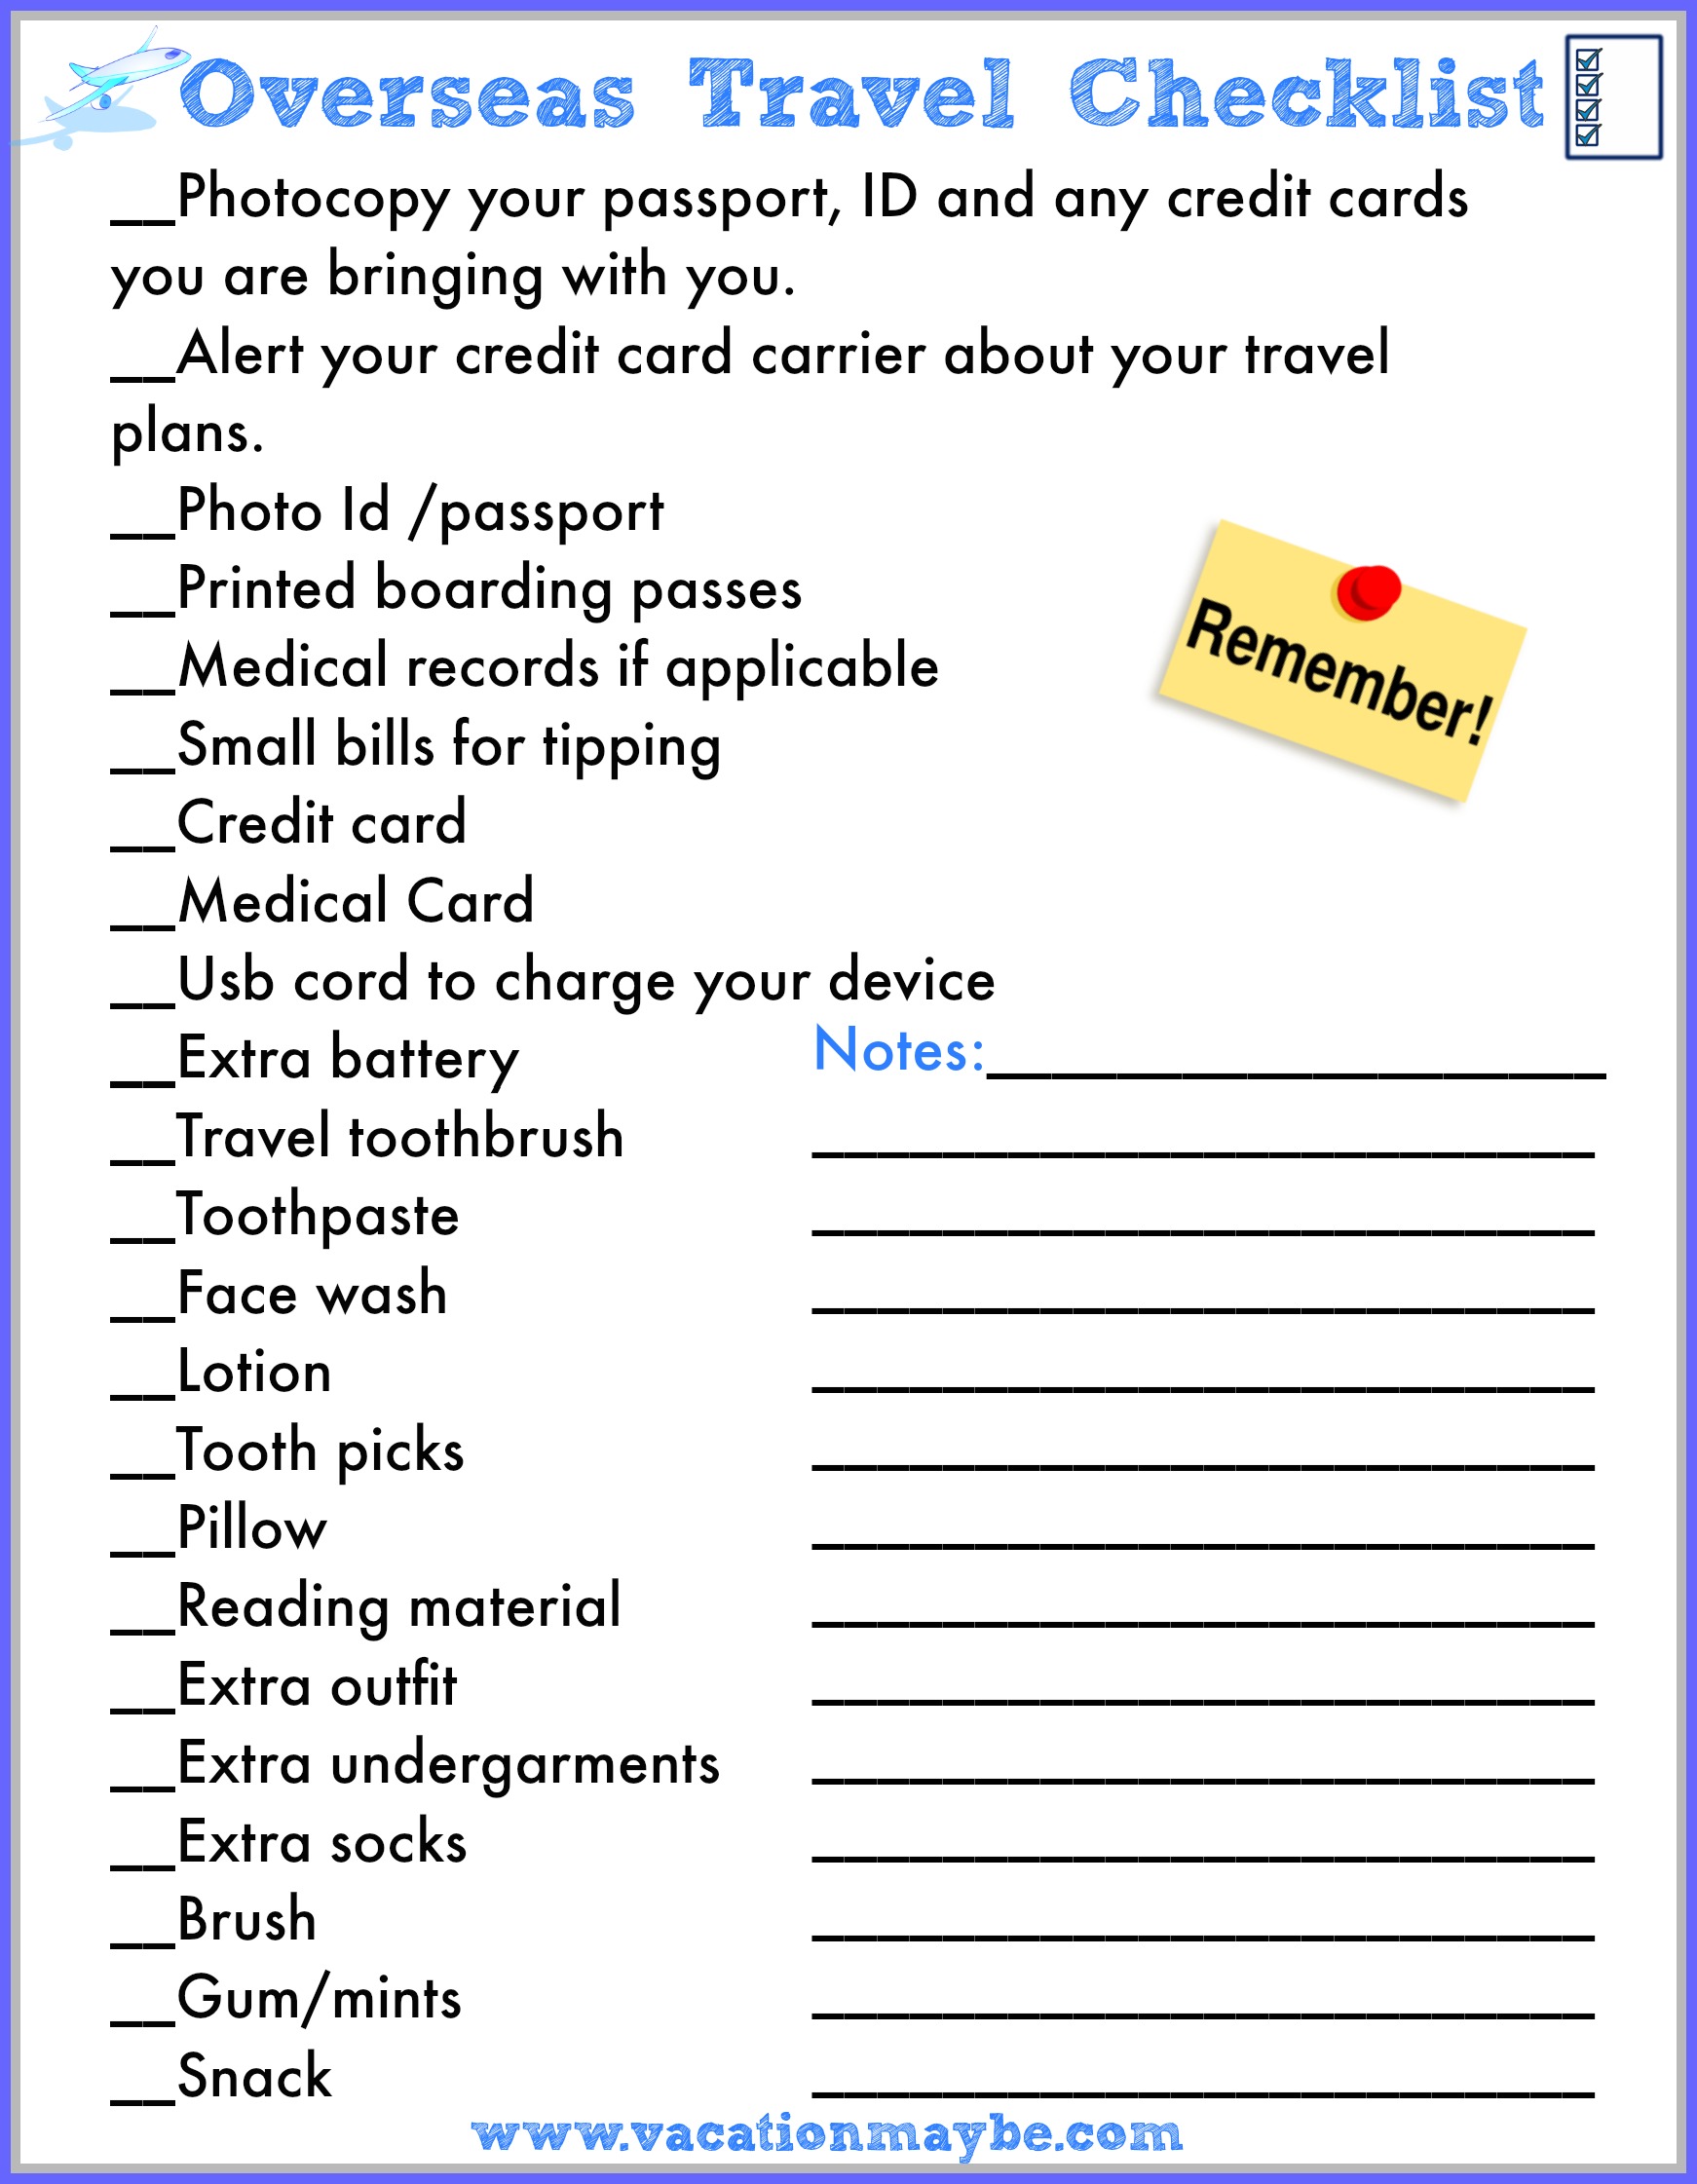 Free Printable Overseas Travel Checklist - VacationMaybe